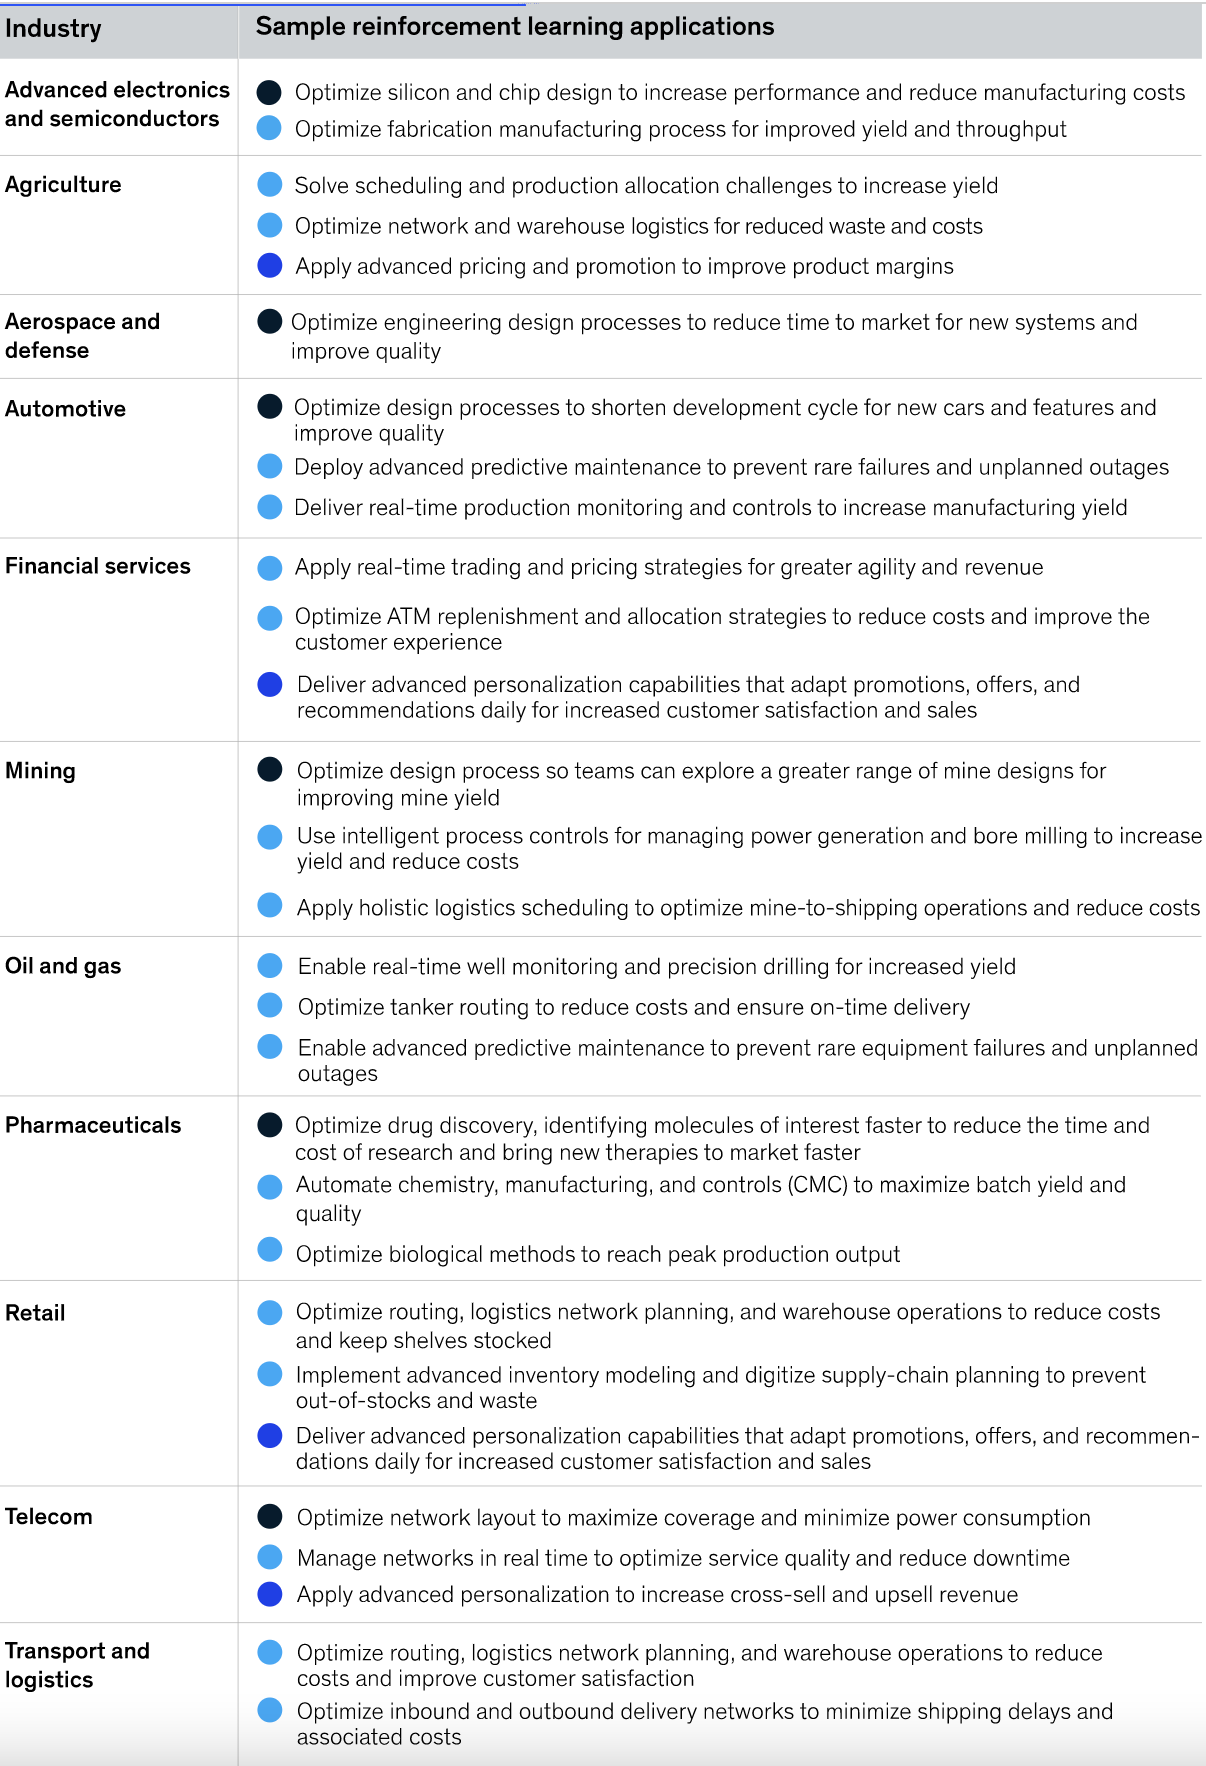 McKinsey's reinforcement learning business use cases